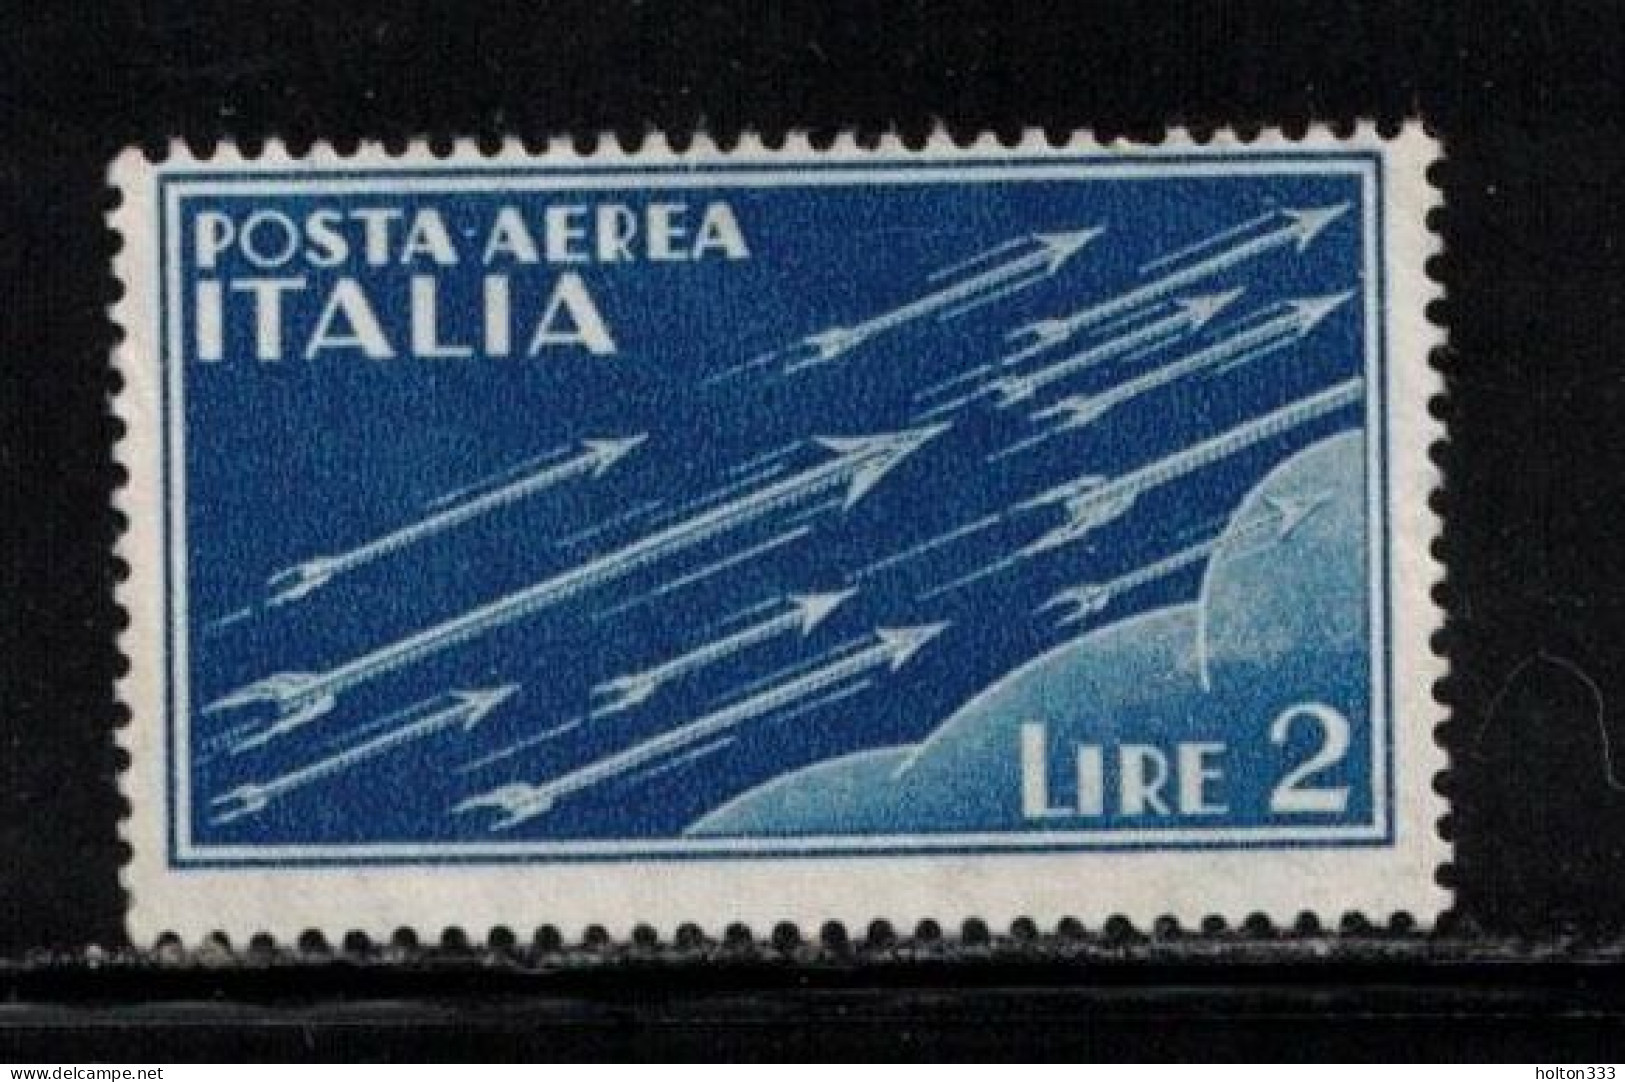 ITALY Scott # C17 Used - Airmail Stamp - 1946-60: Used